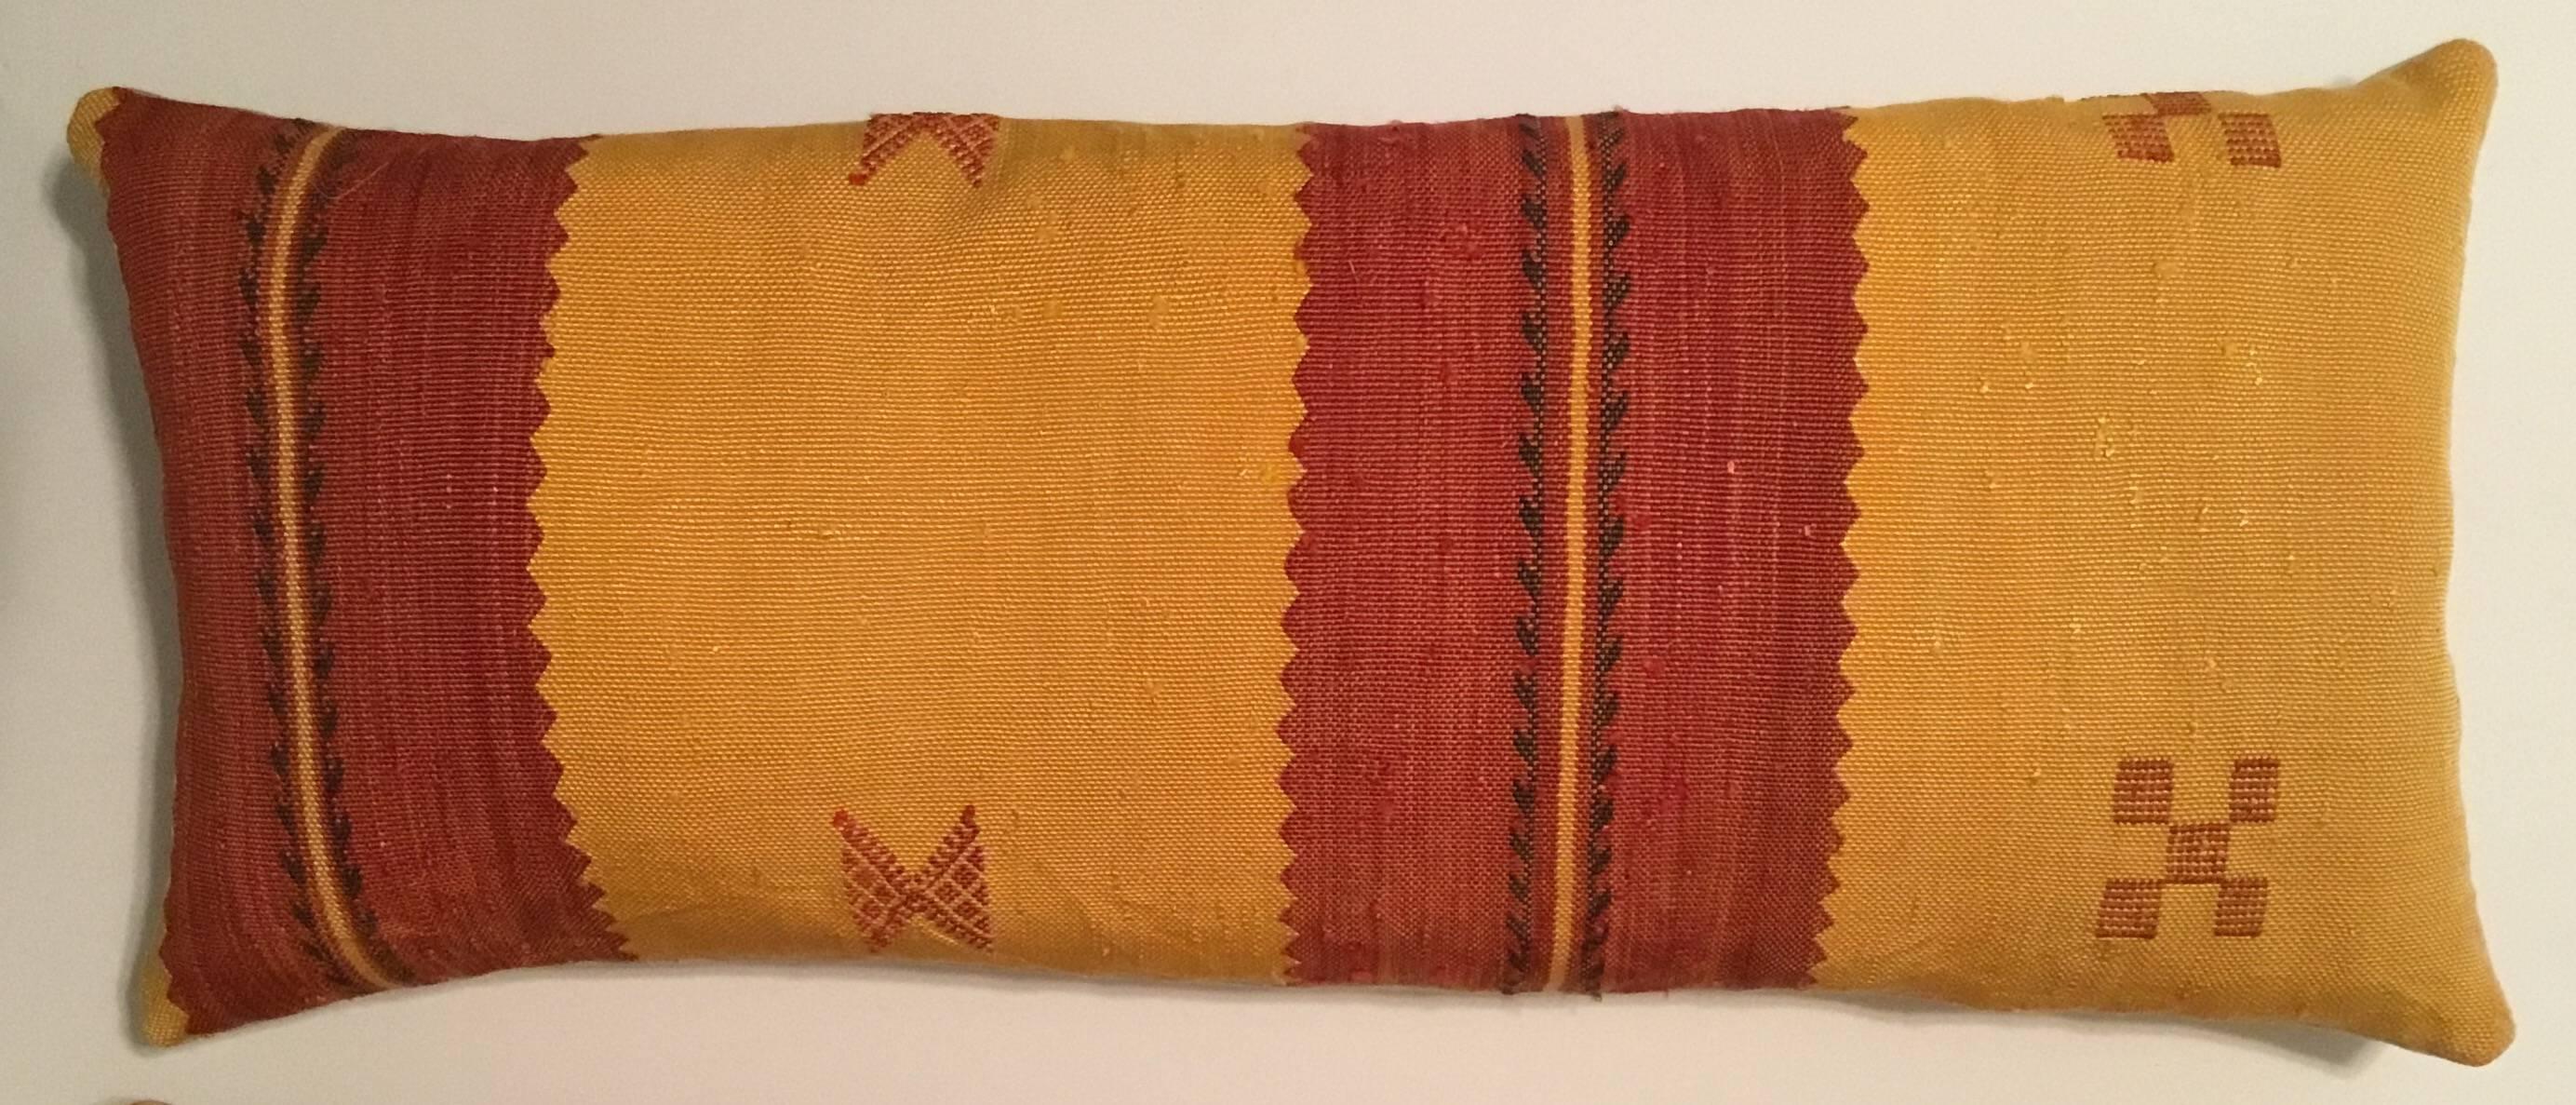 Beautiful pair of pillows made of handwoven flat-weave Kilim rug fragment.
With geometric motifs. Red-salmon and yellow-muster colors.
Down and feather inserts, silk backing.